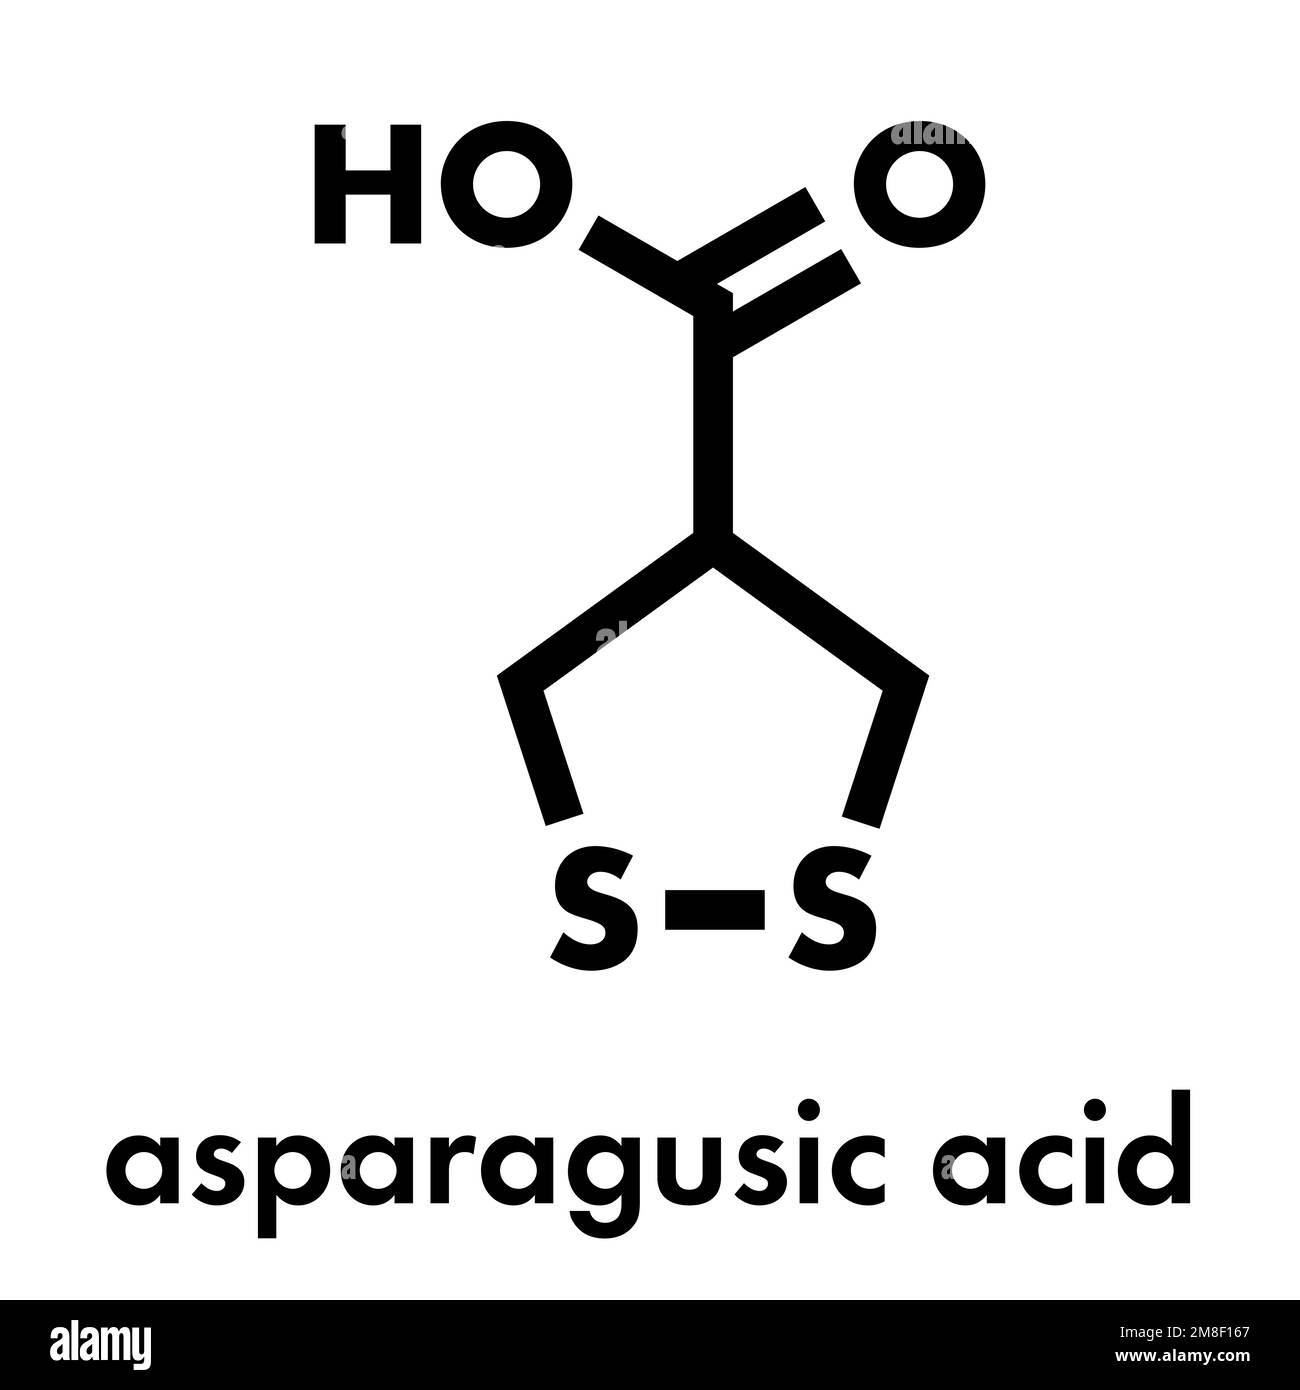 Asparagusic acid molecule. Organosulfur compound present in asparagus that is responsible for the typical urine odour after eating asparagus. Skeletal Stock Vector